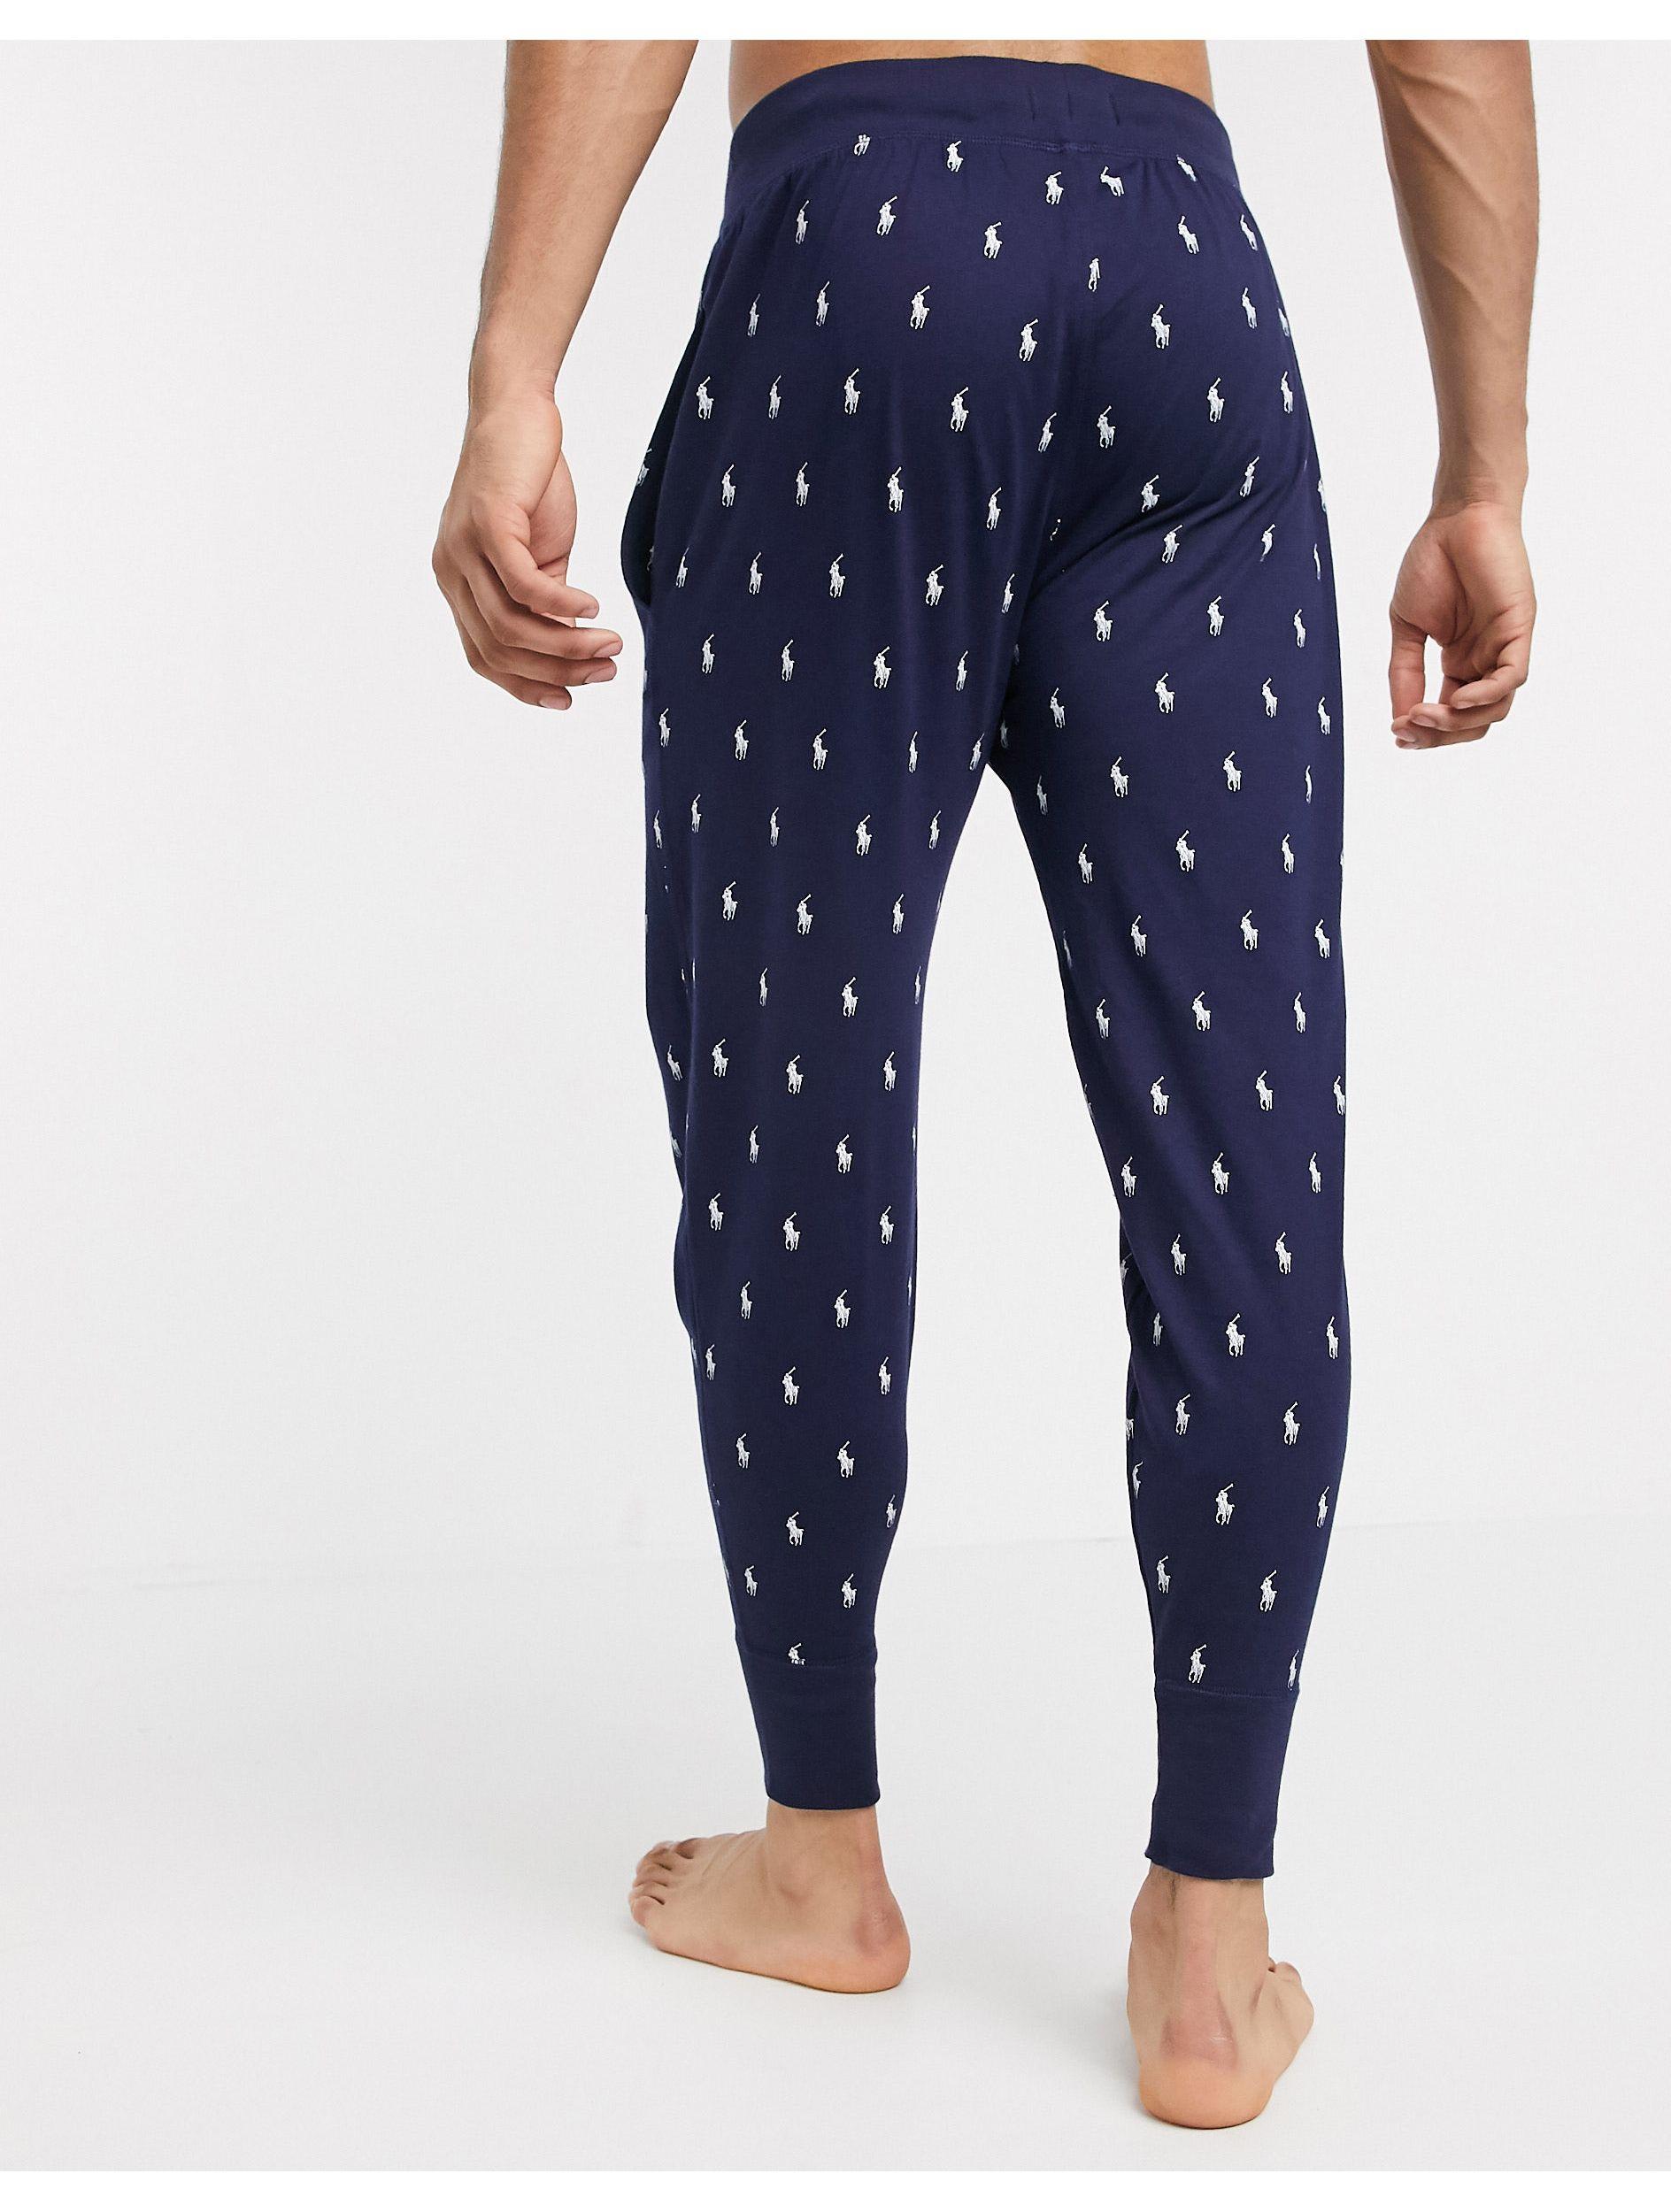 Polo Ralph Lauren Cotton Pony Print Pajama Jogger Pants in Navy (Blue) for  Men - Lyst